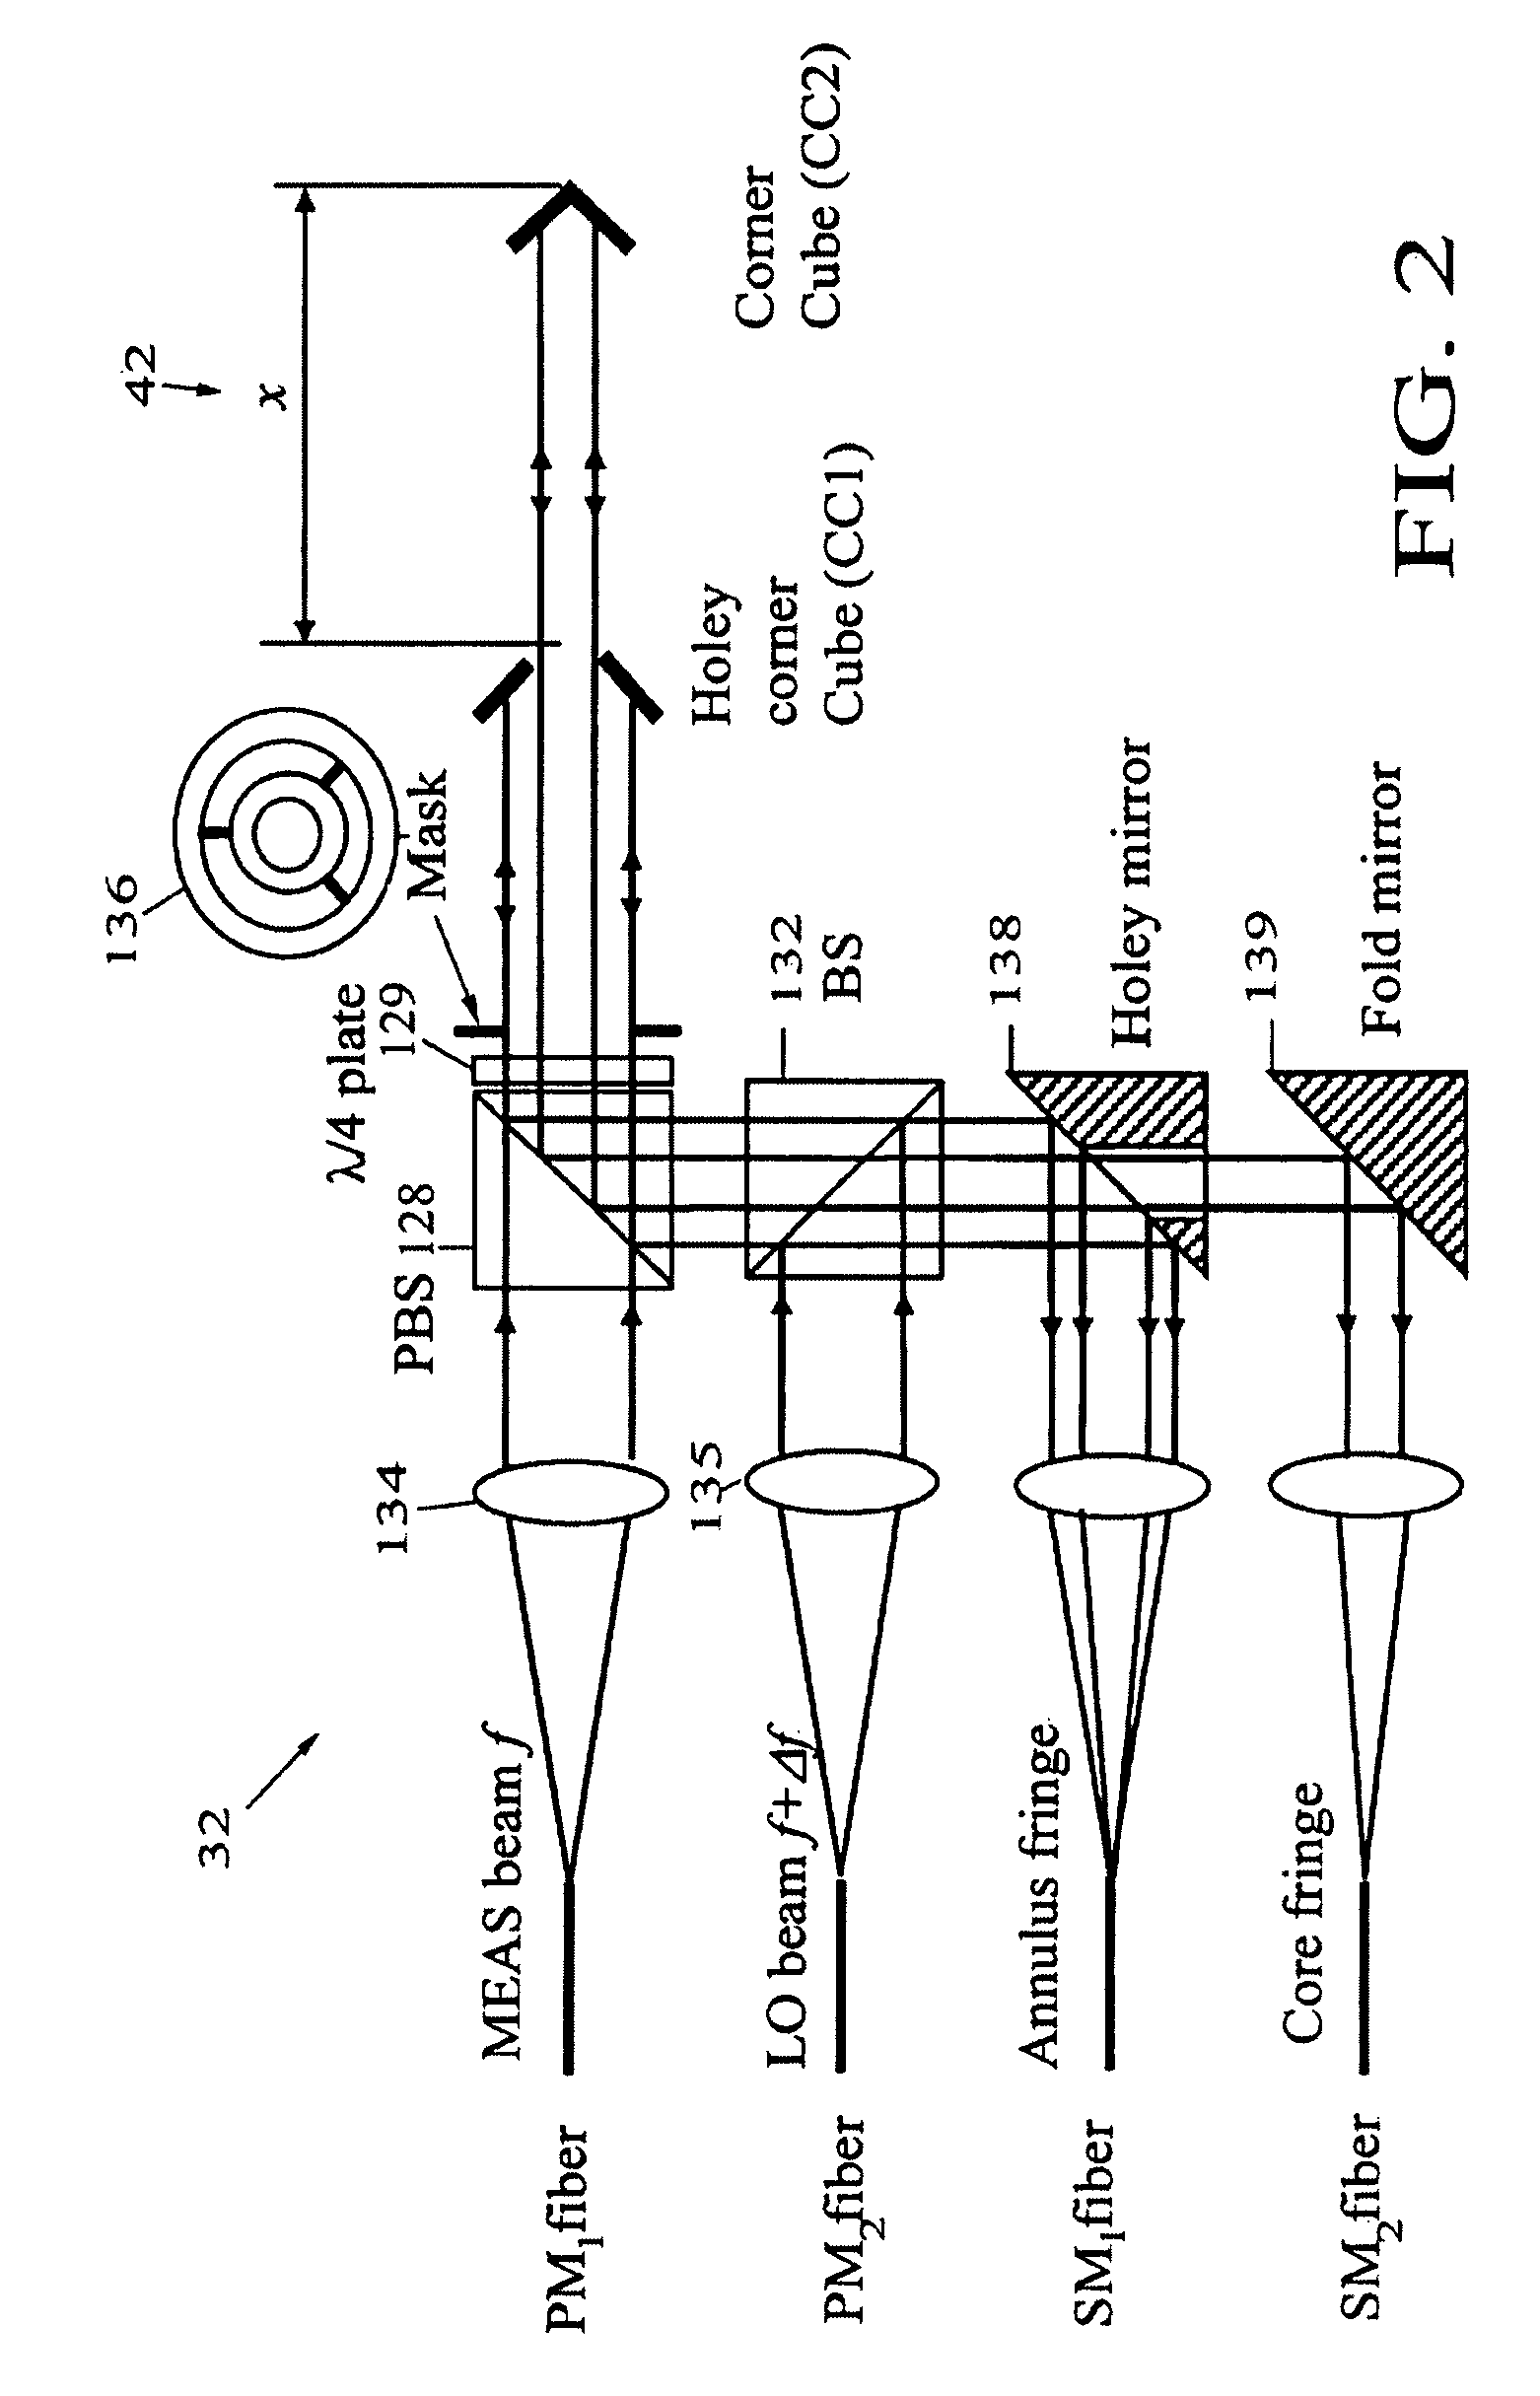 Swept frequency laser metrology system